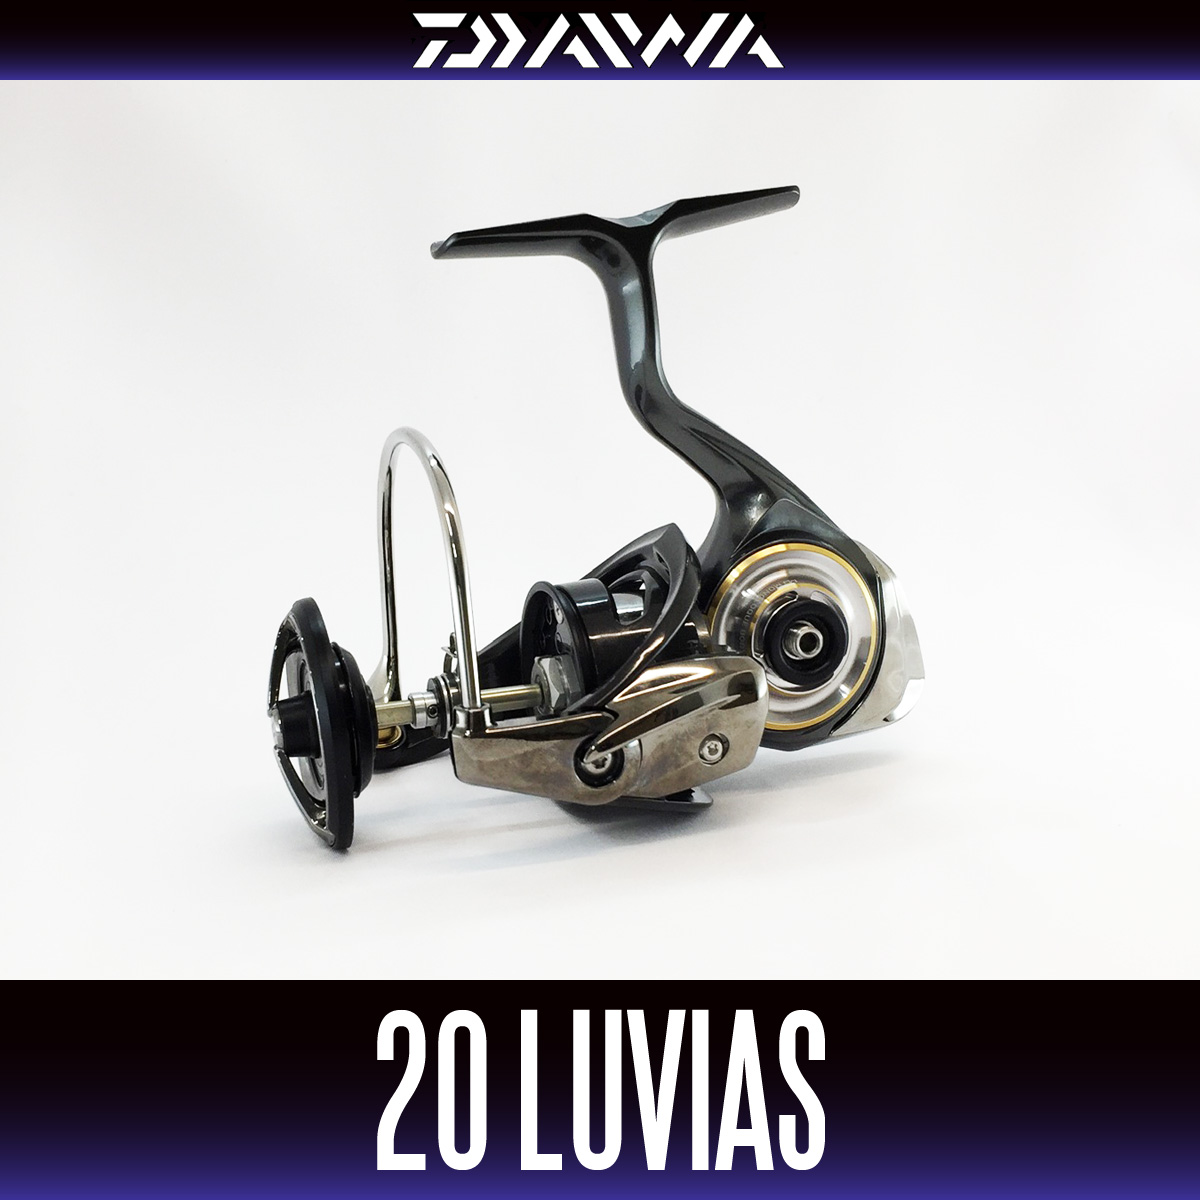 DAIWA Genuine Product] 20 LUVIAS Main Unit only (with No Spool and